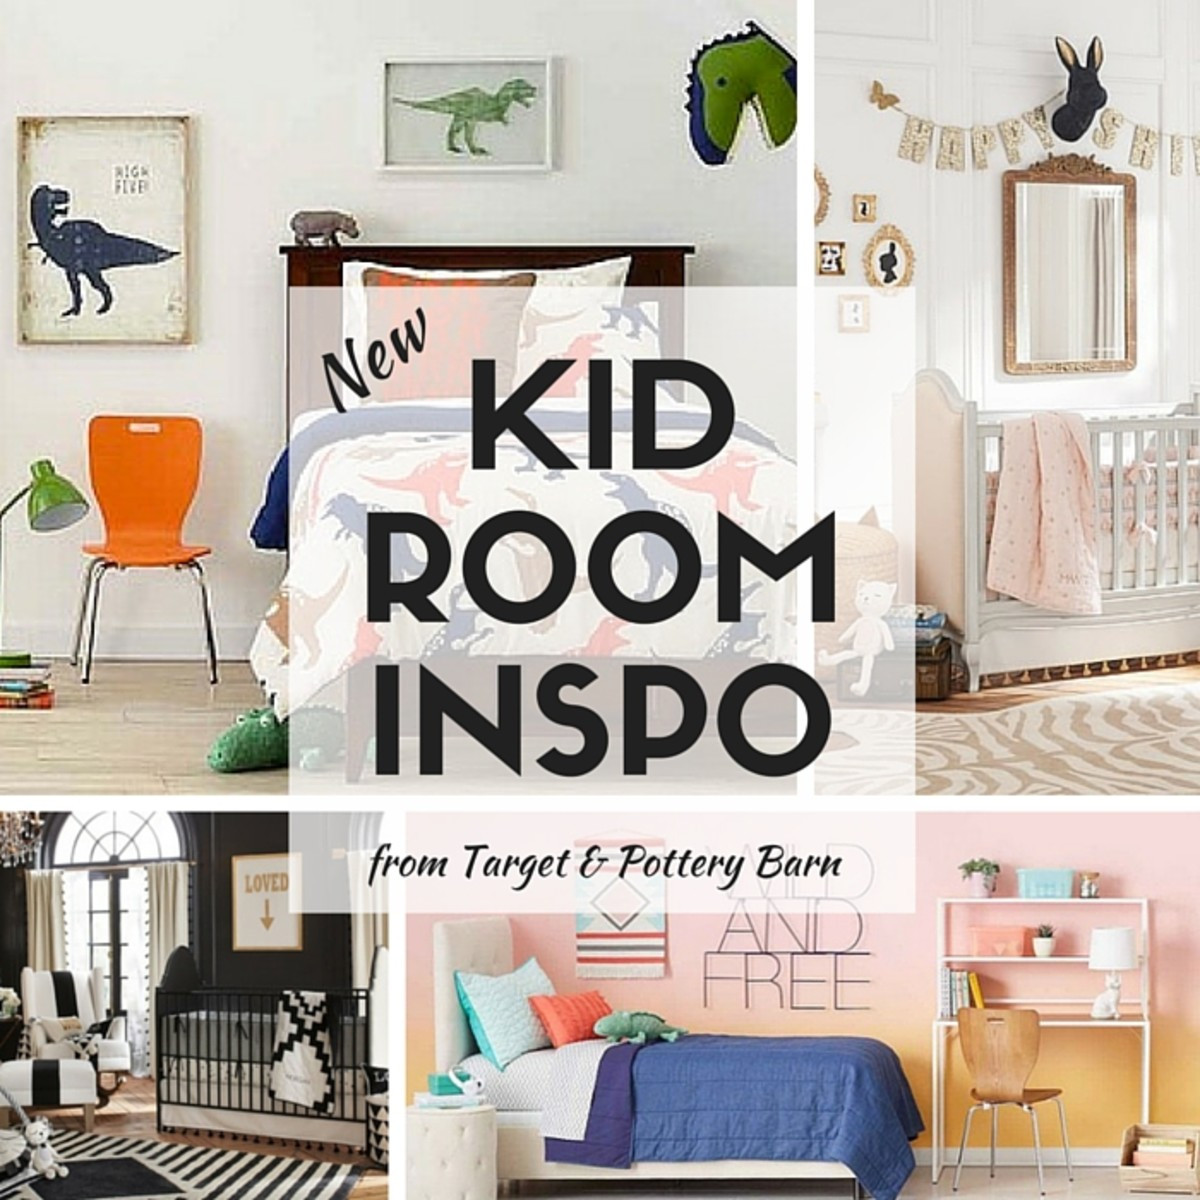 Target Kids Room
 Kid Decor Inspiration from Tar and Pottery Barn